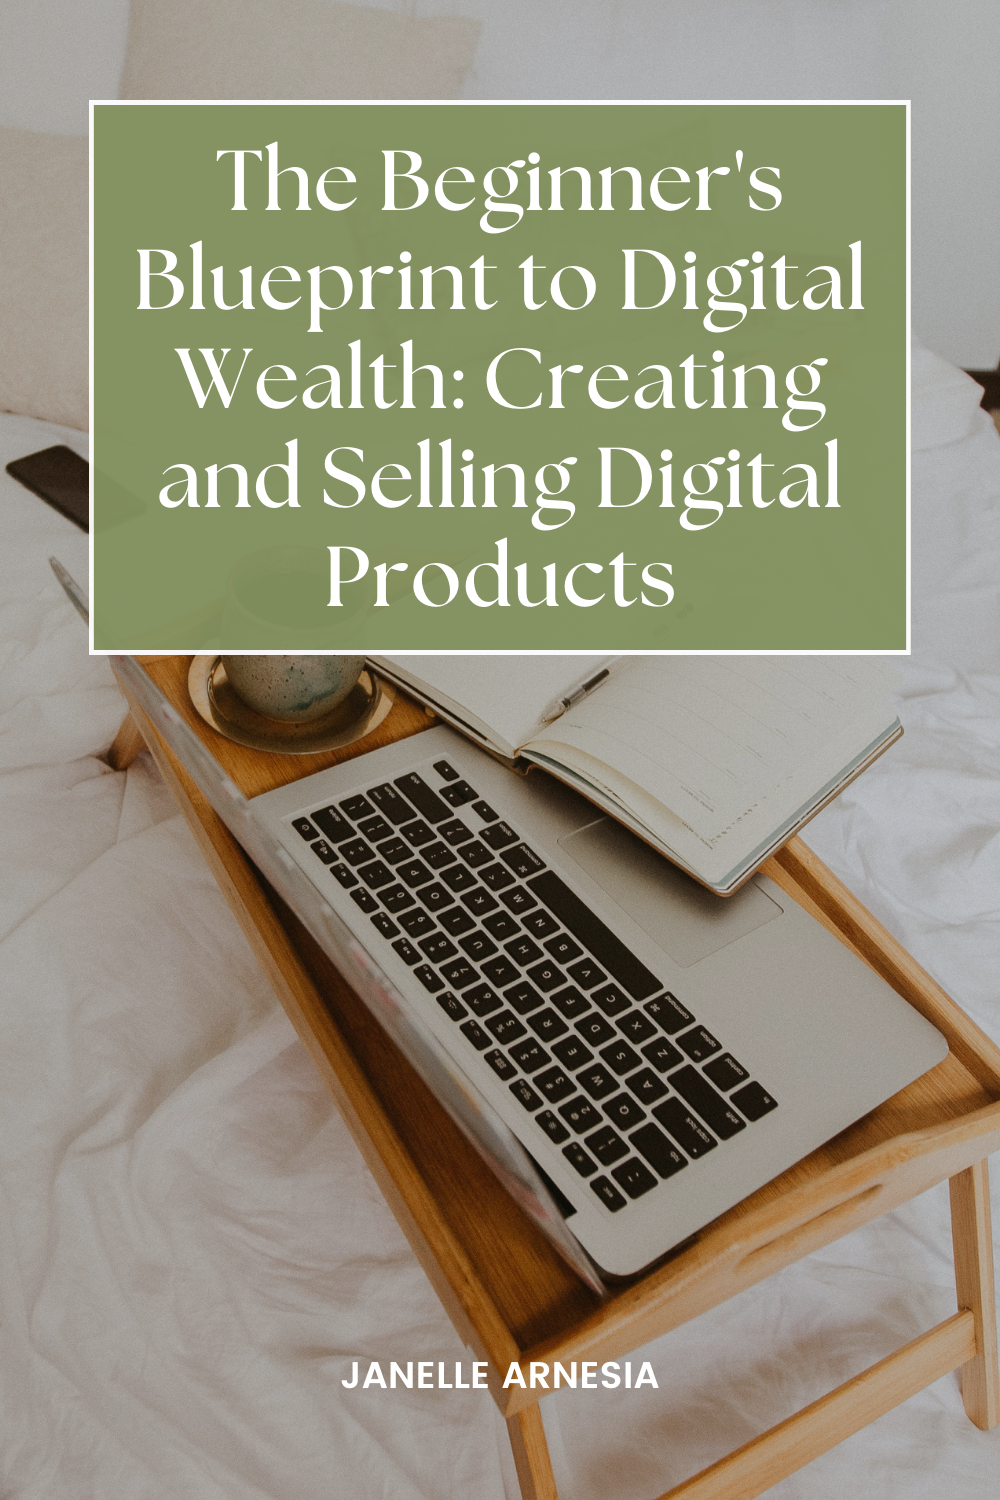 The Beginner's Blueprint to Digital Wealth: Creating and selling Digital Products